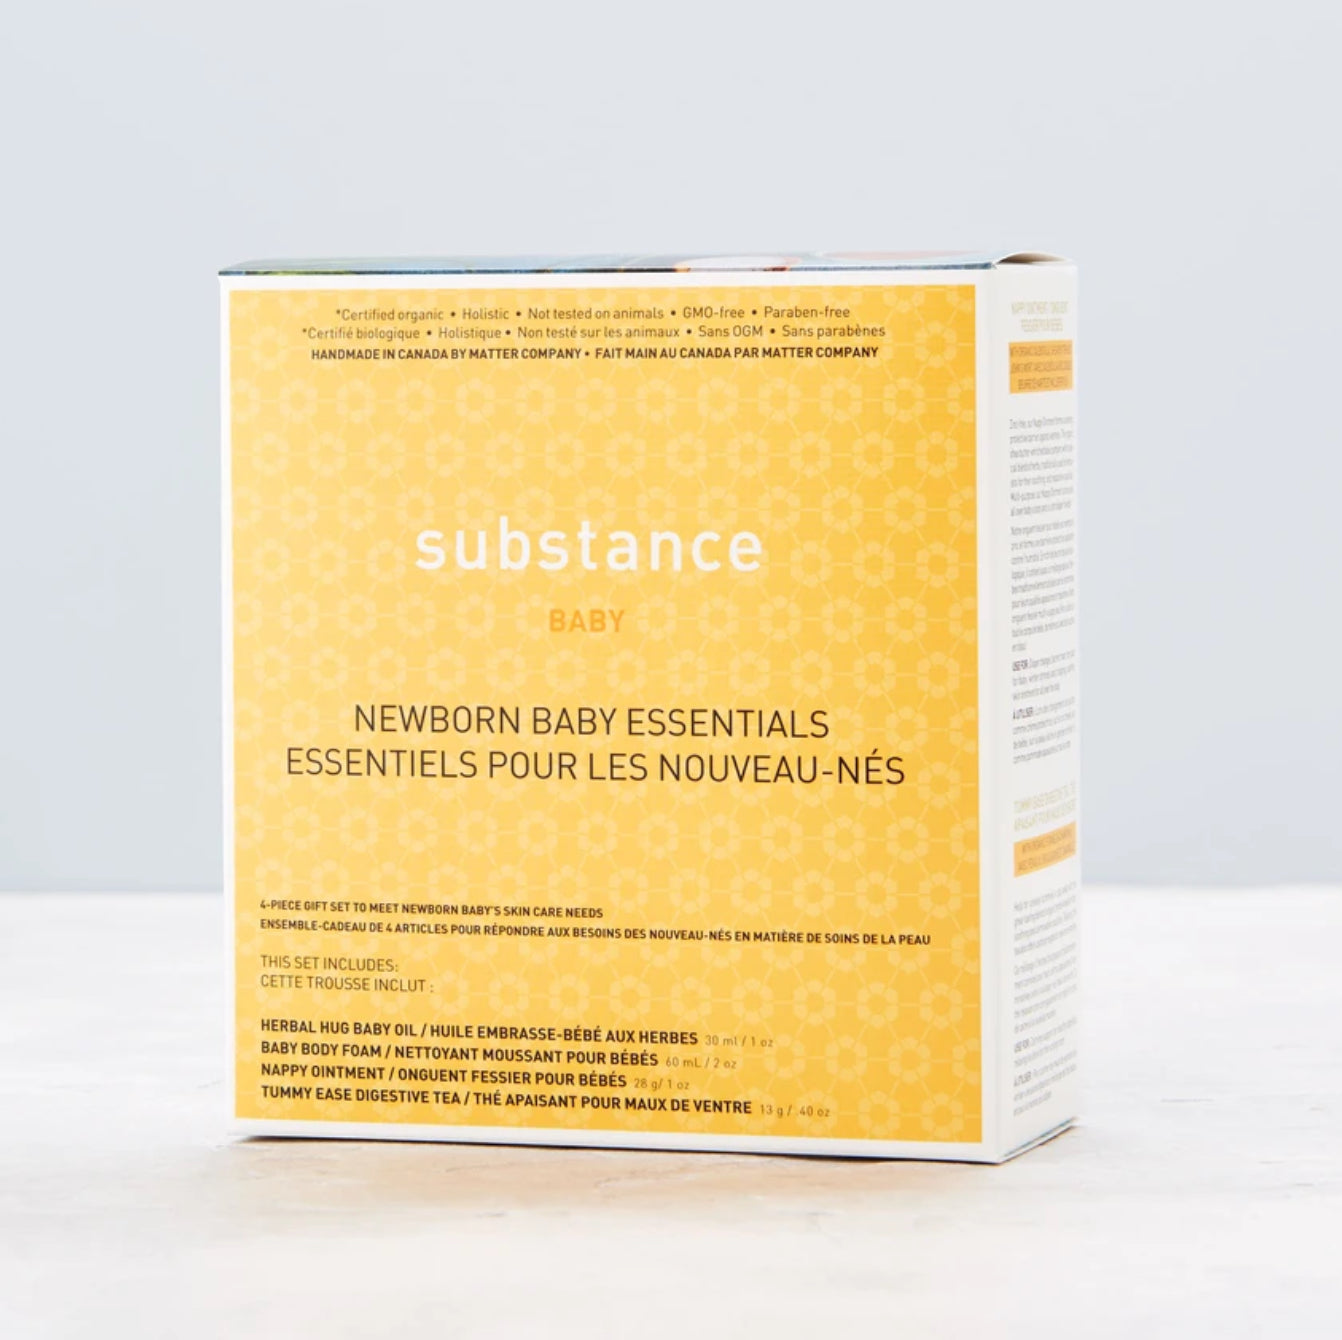 Substance Baby | Newborn Baby Essential Kit By Matter Company